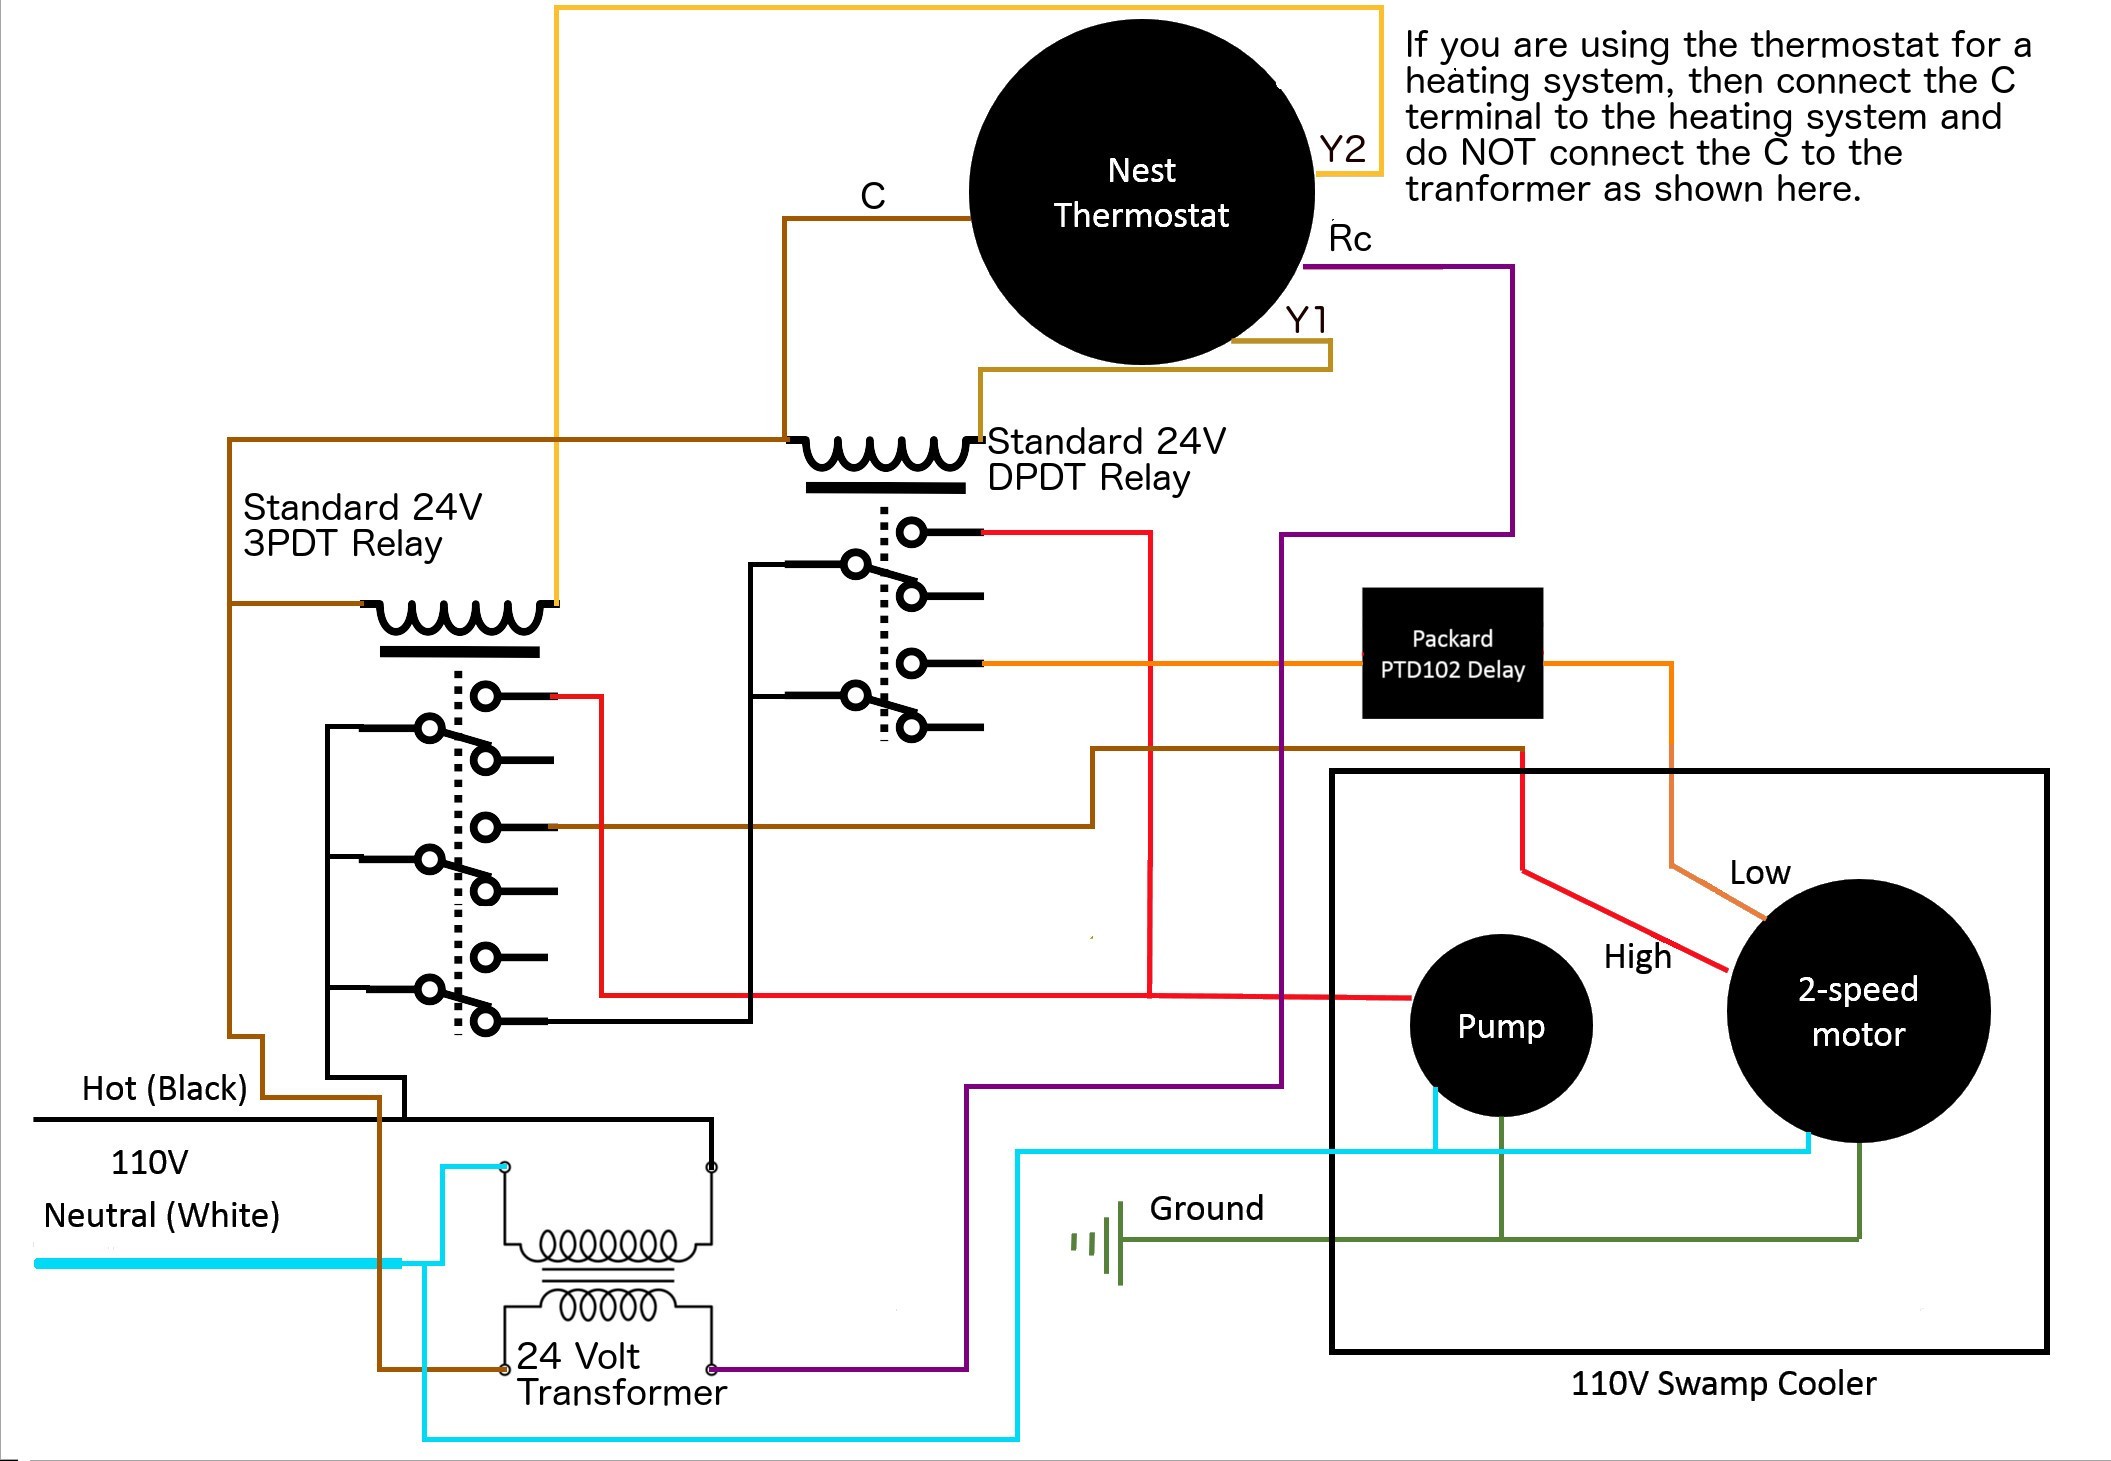 Wiring Diagram Motor Control System Valid Wiring Controlling 110v Swamp Cooler Using Nest Thermostat Fair